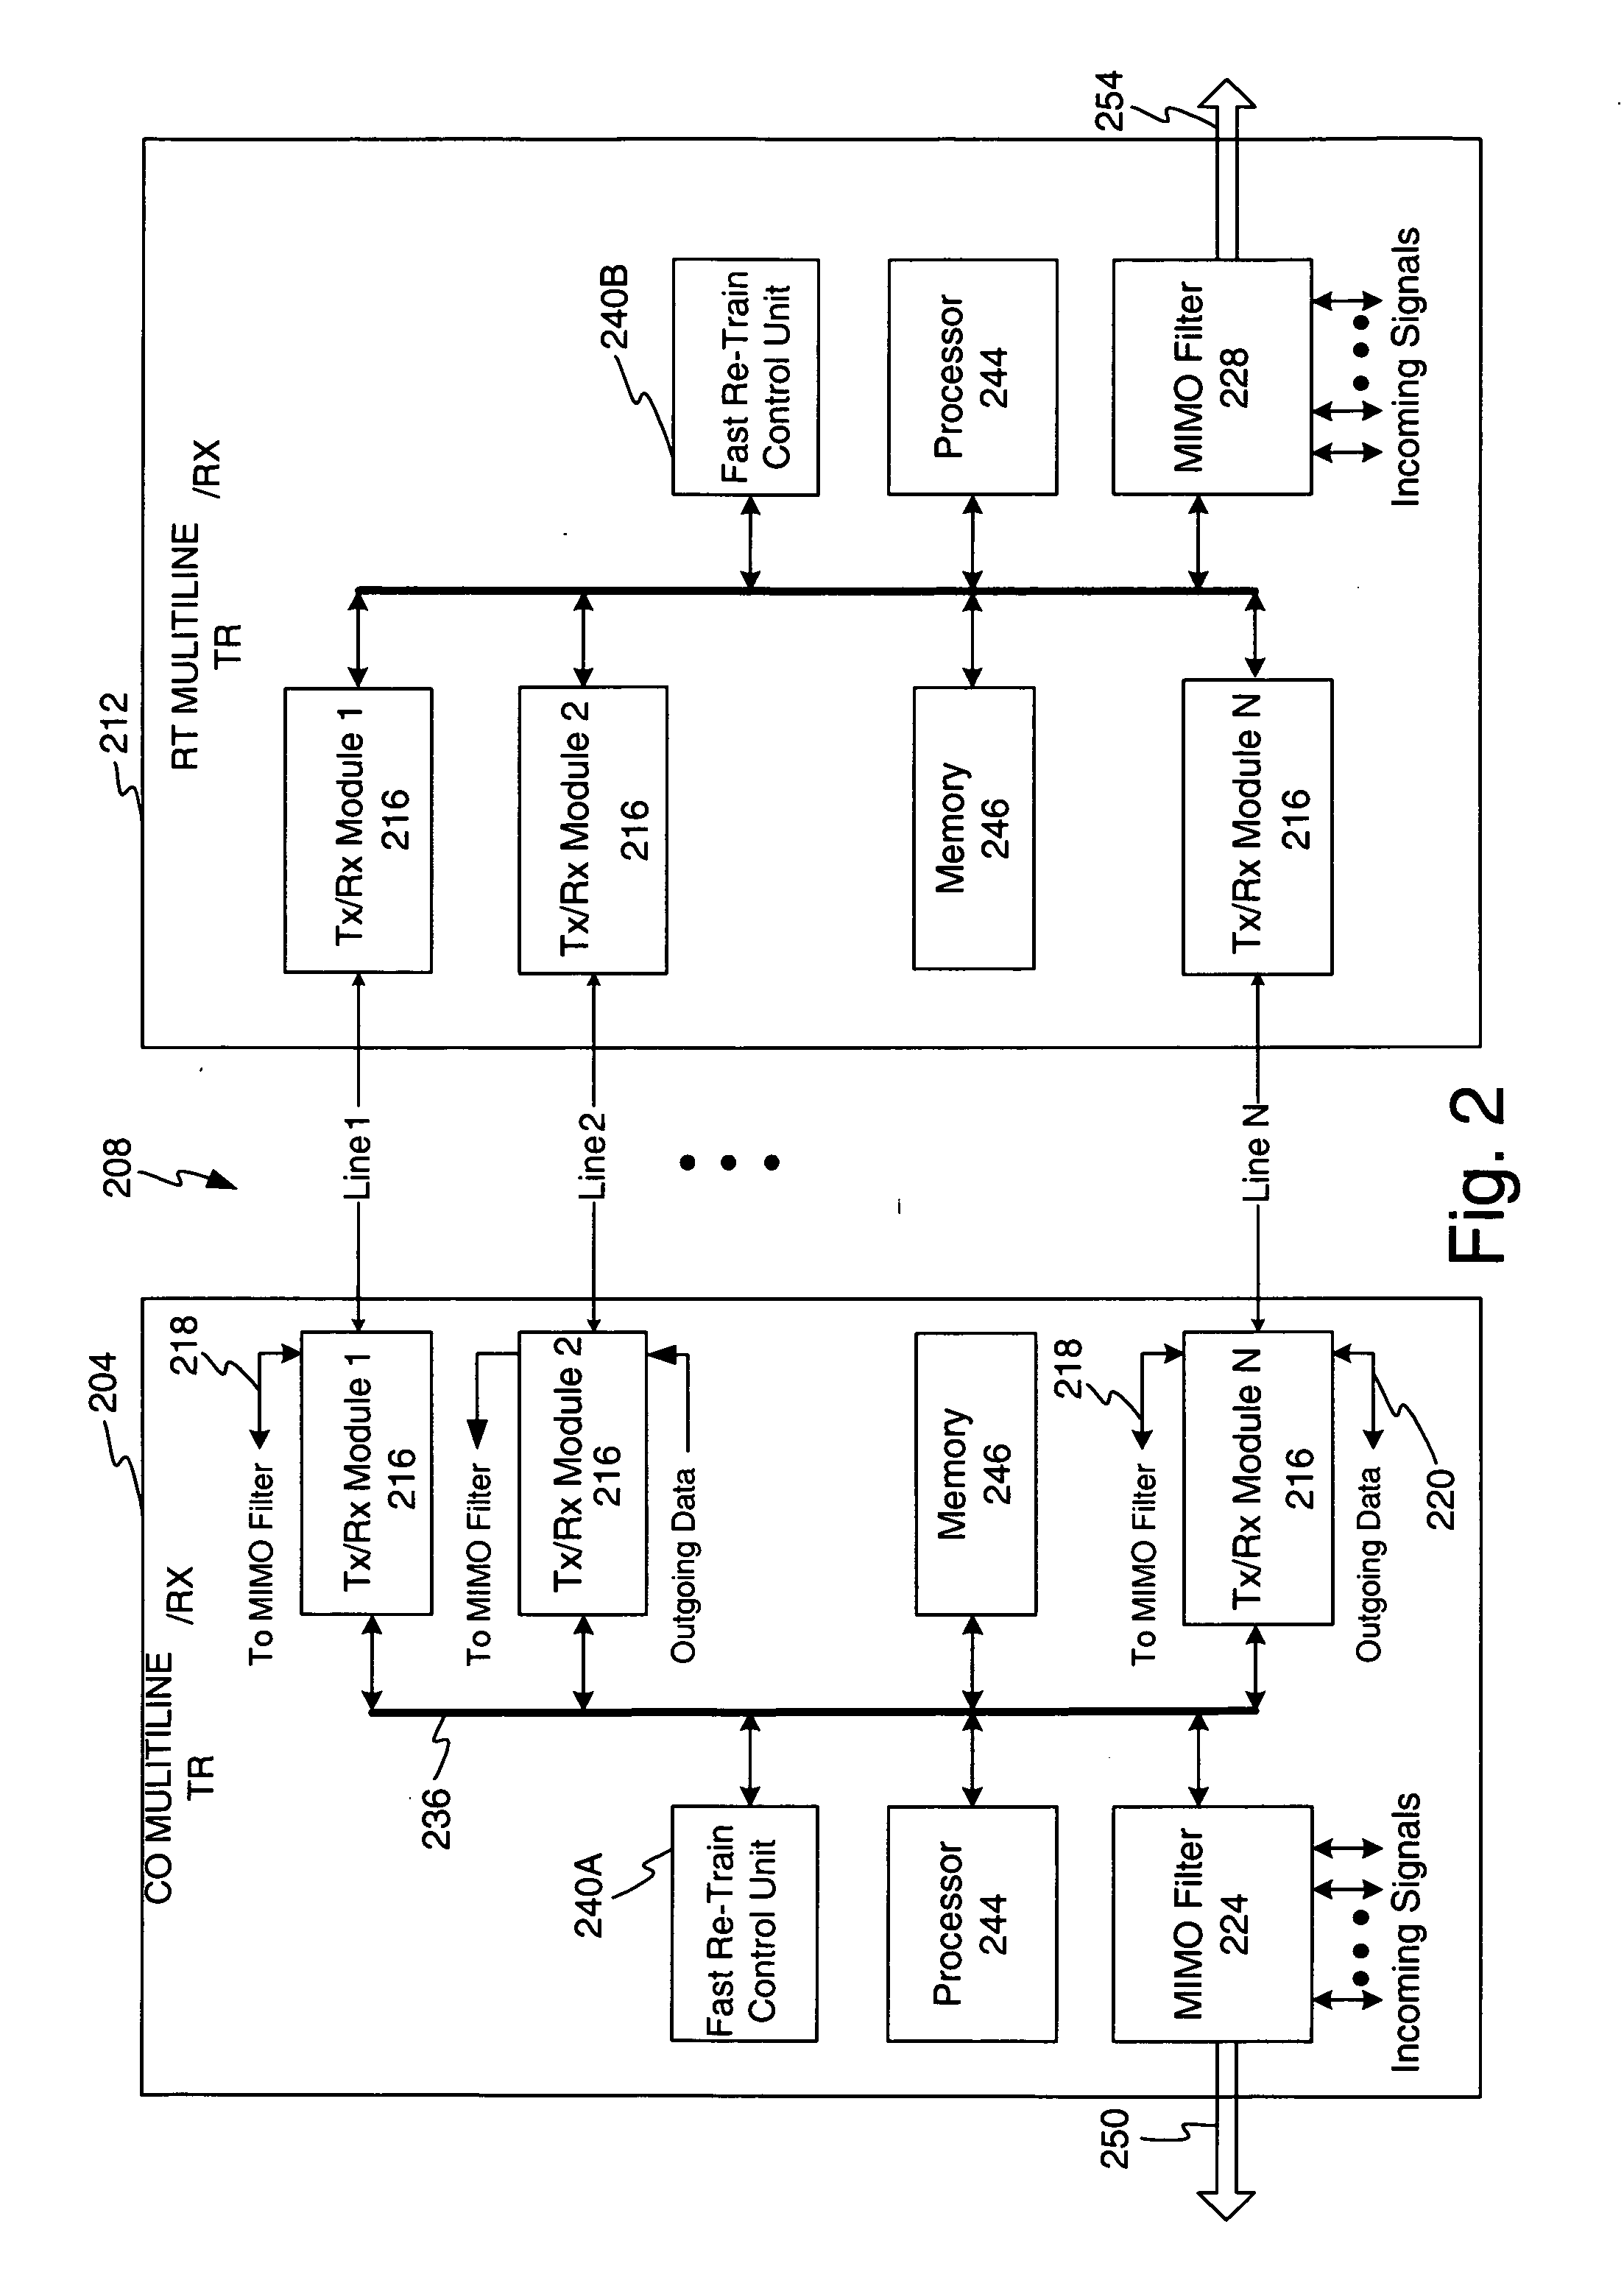 Method and apparatus for adapting to dynamic channel conditions in a multi-channel communication system